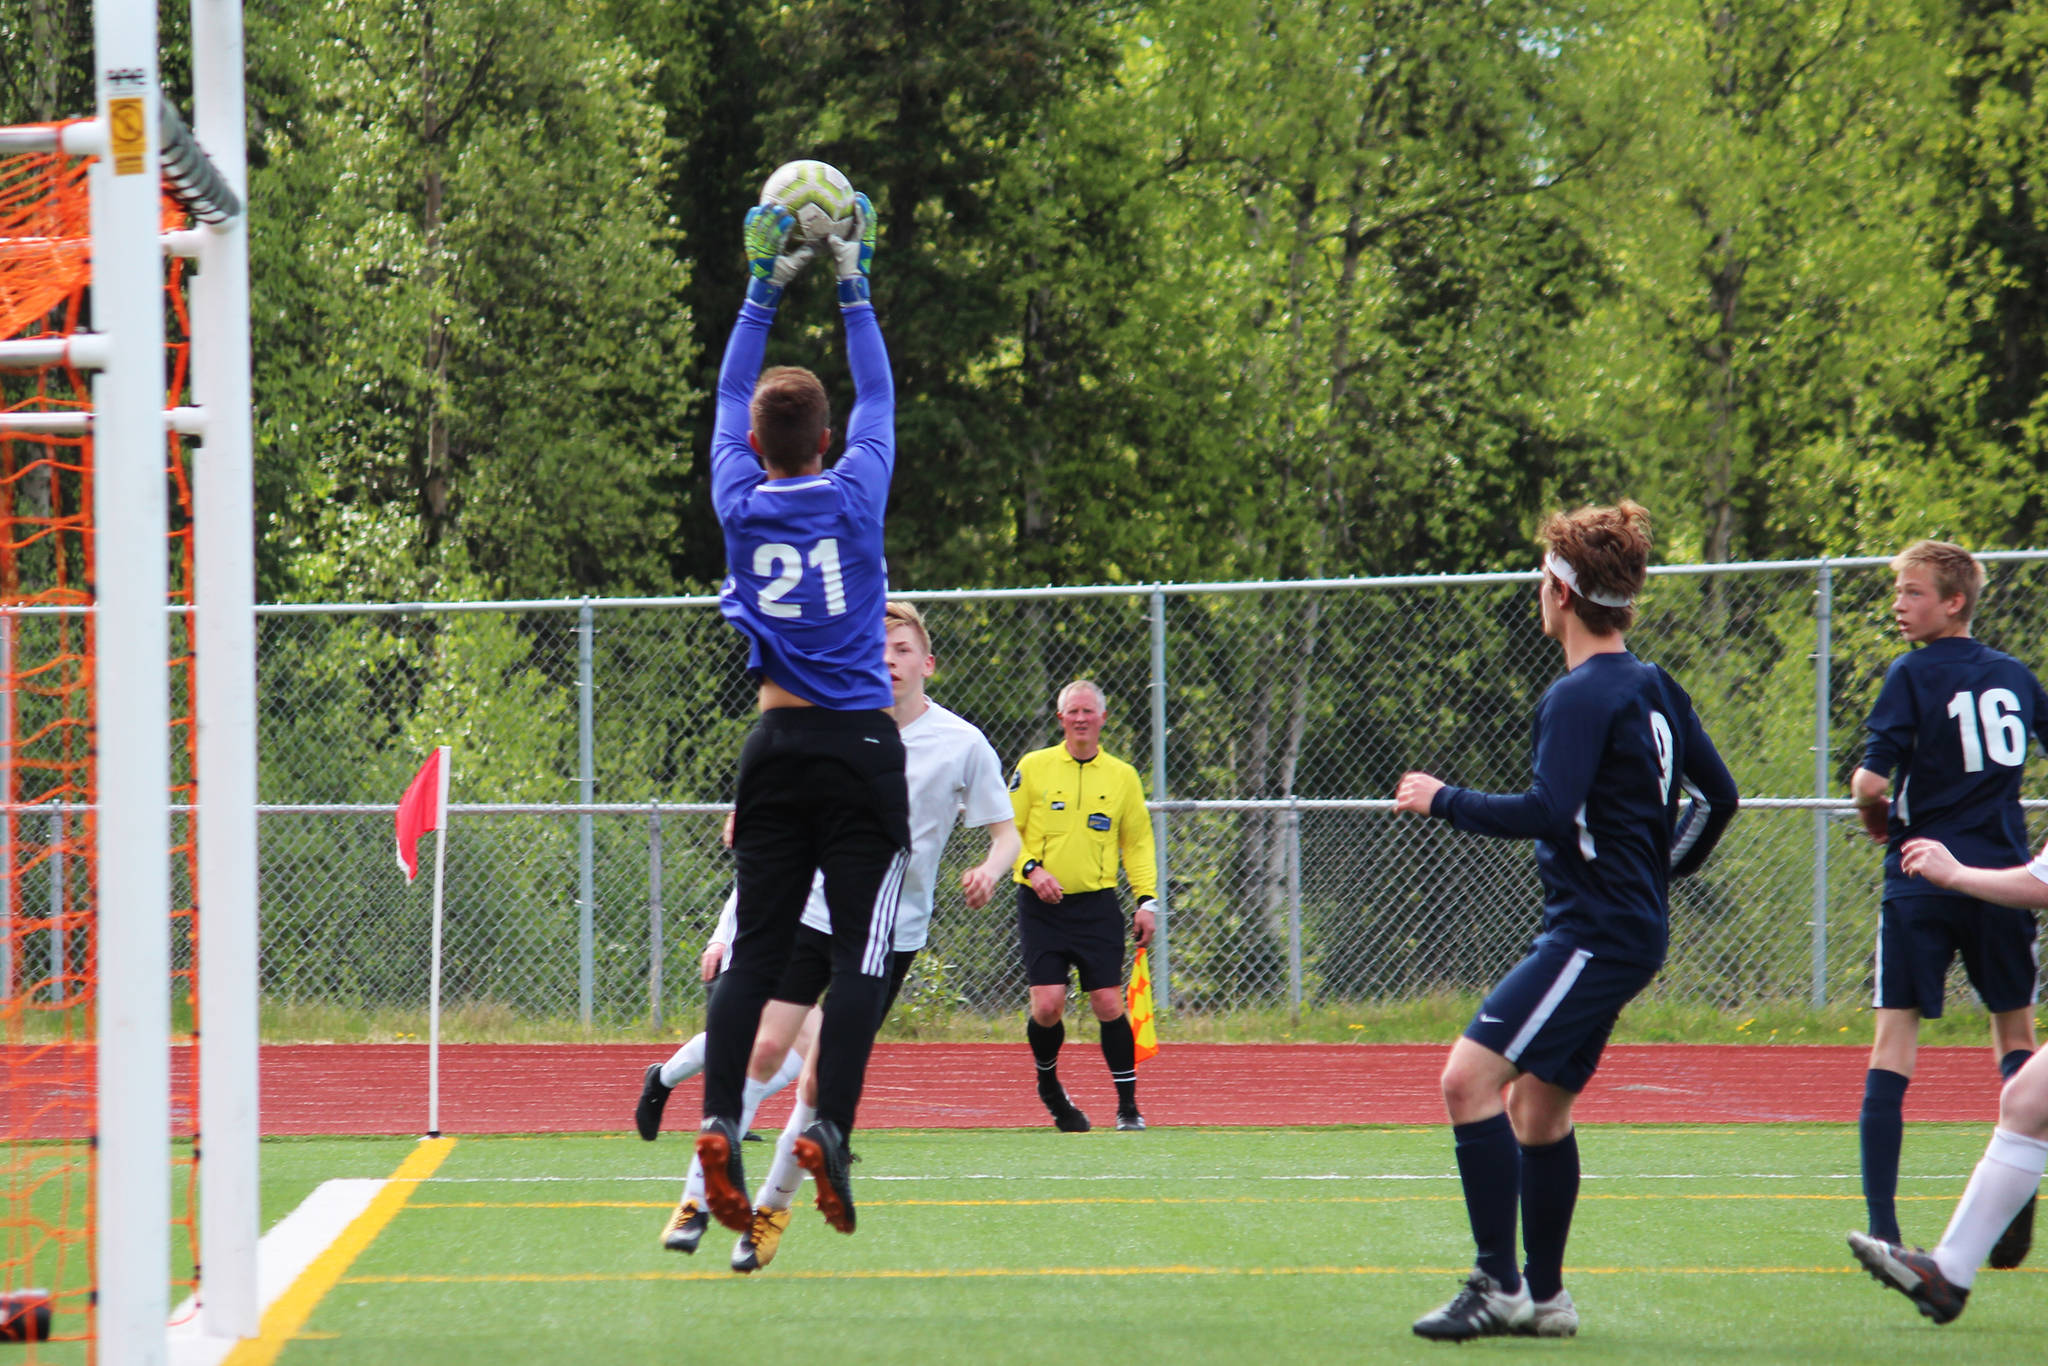 Honer goalkeeper Clayton Beachy makes a save against Grace Christian School in a Friday, May 24, 2019 game during the Division II state soccer championship tournament at Eagle River High School in Eagle River, Alaska. (Photo by Megan Pacer/Homer News)